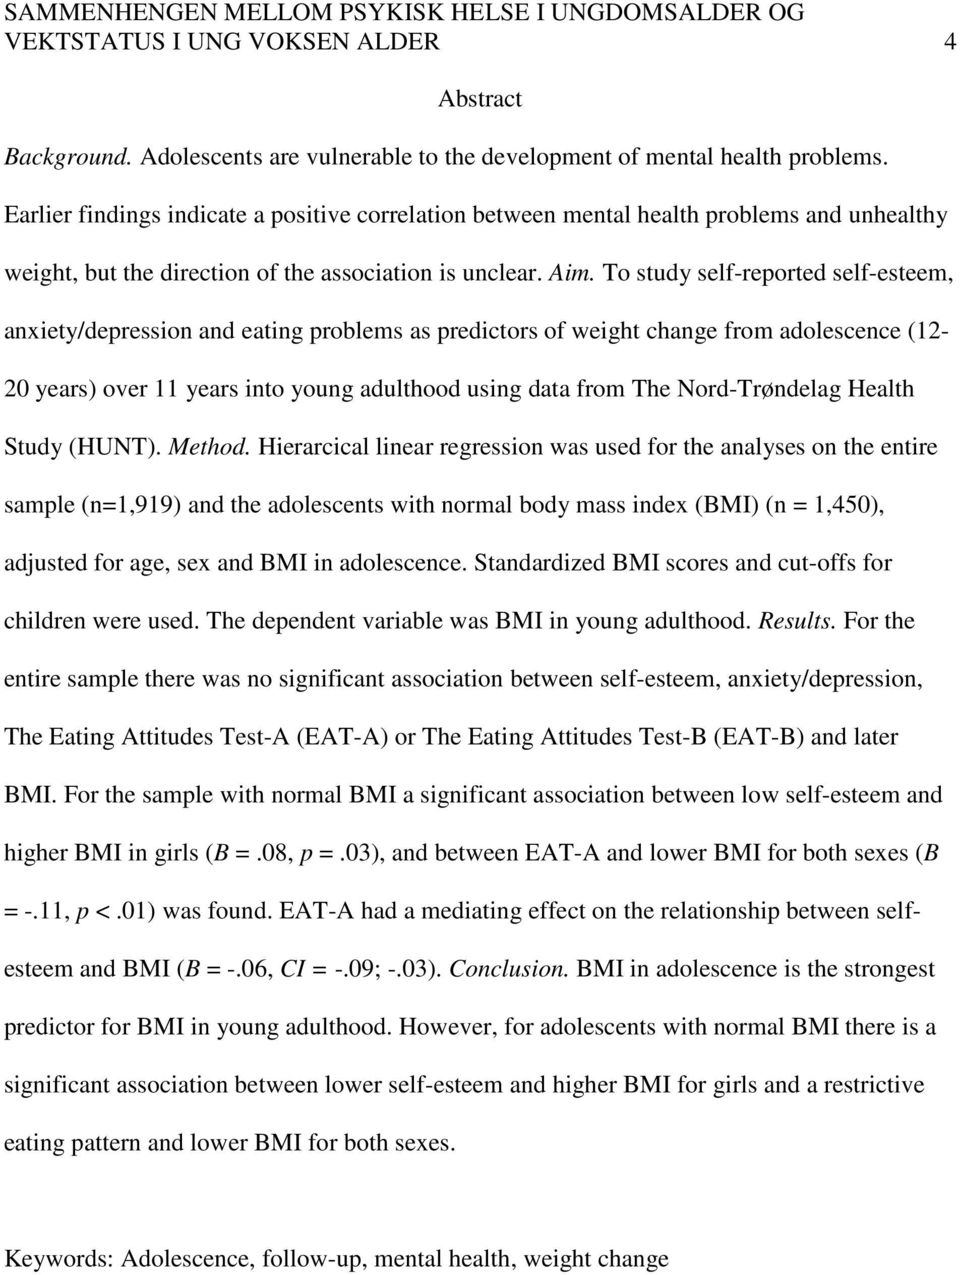 To study self-reported self-esteem, anxiety/depression and eating problems as predictors of weight change from adolescence (12-20 years) over 11 years into young adulthood using data from The